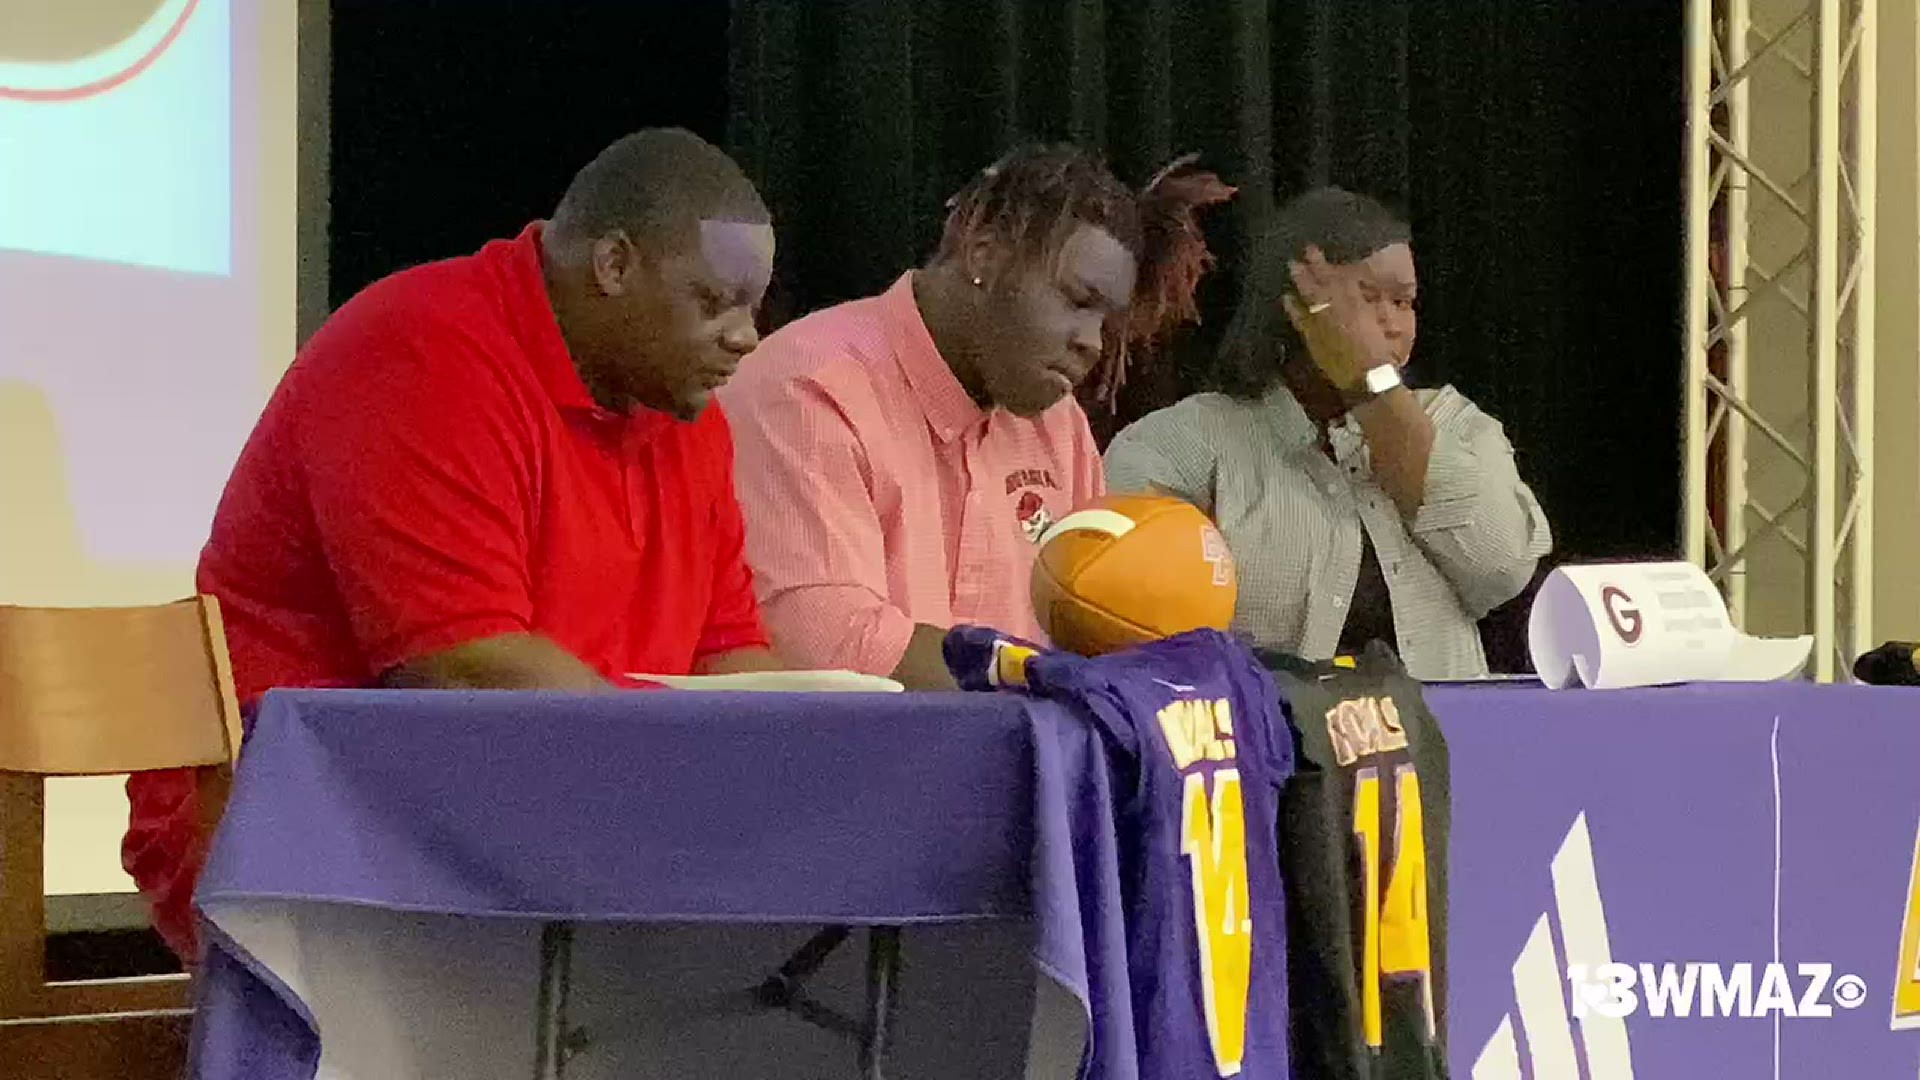 Congratulations to Bleckley County's signees!
Dominic Sasser signs with Carleton College
Amarius Mims signs with UGA